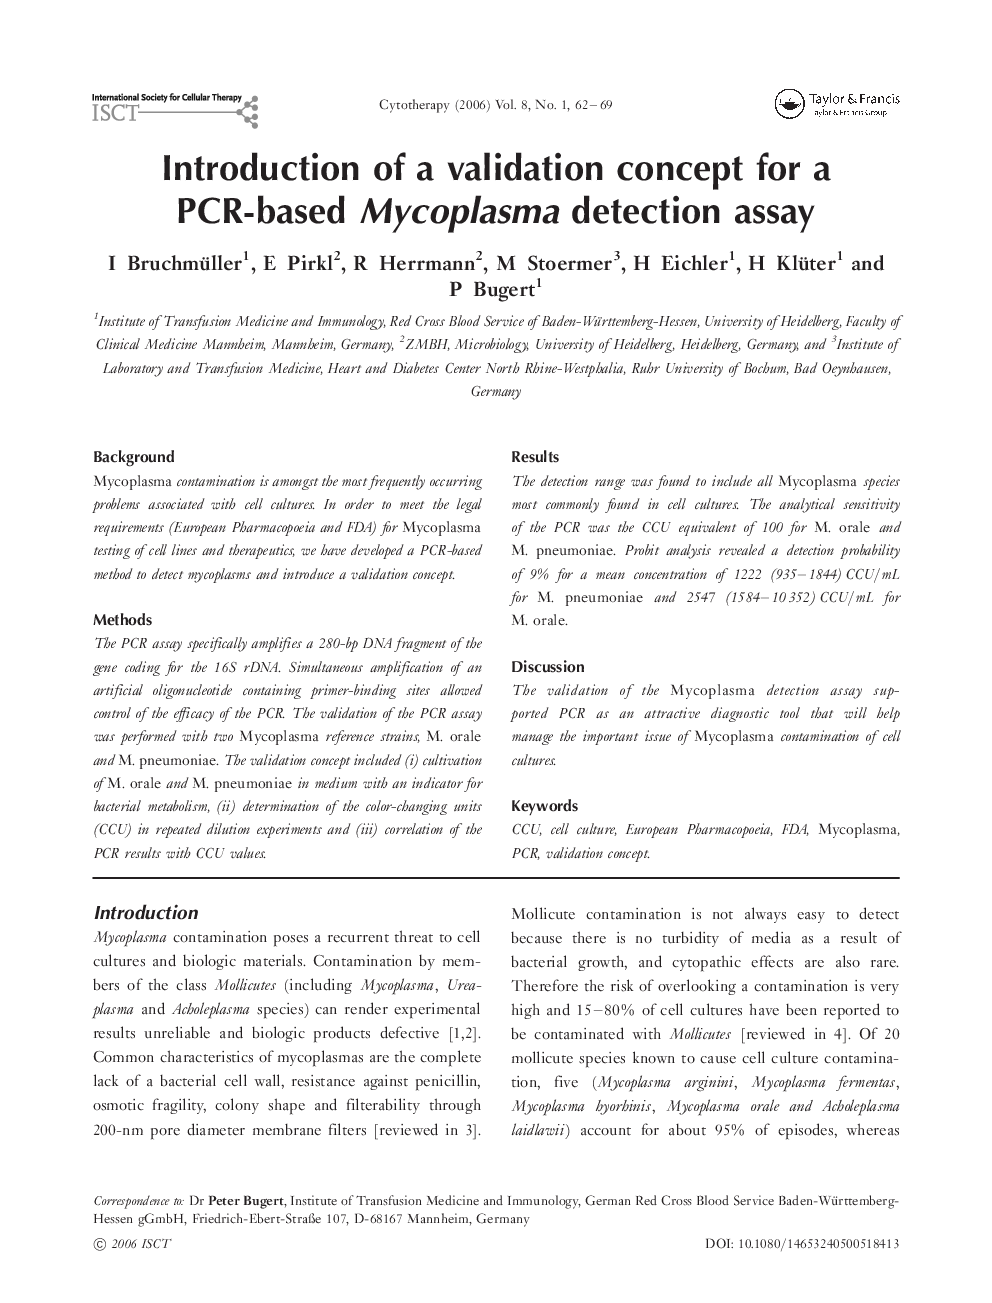 Introduction of a validation concept for a PCR-based Mycoplasma detection assay